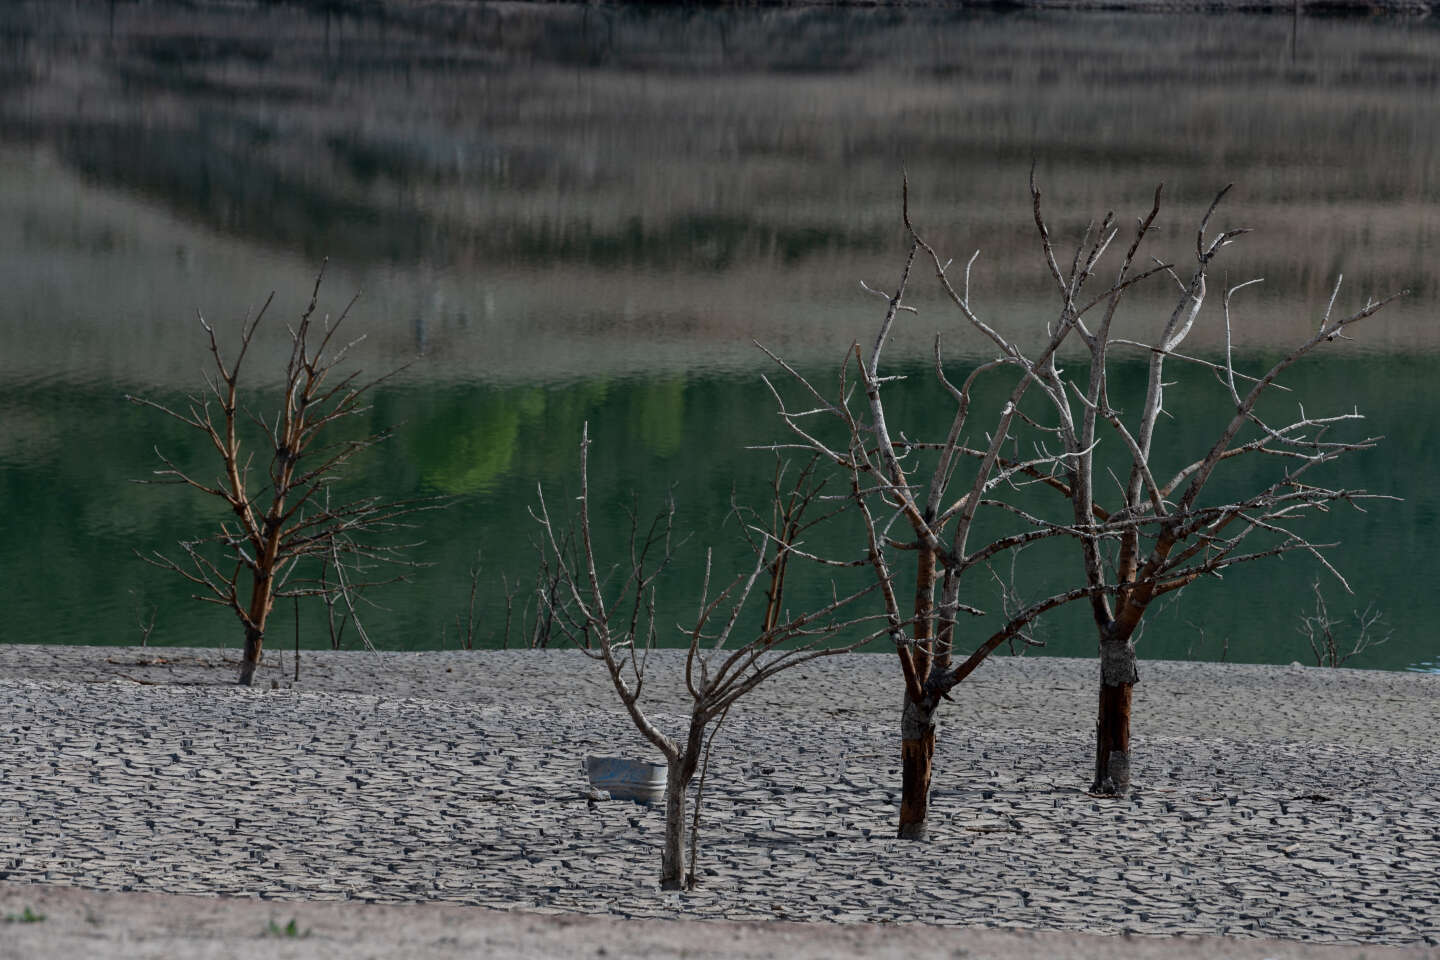 A Decade After Barcelona's Water Emergency, Drought Still Stalks